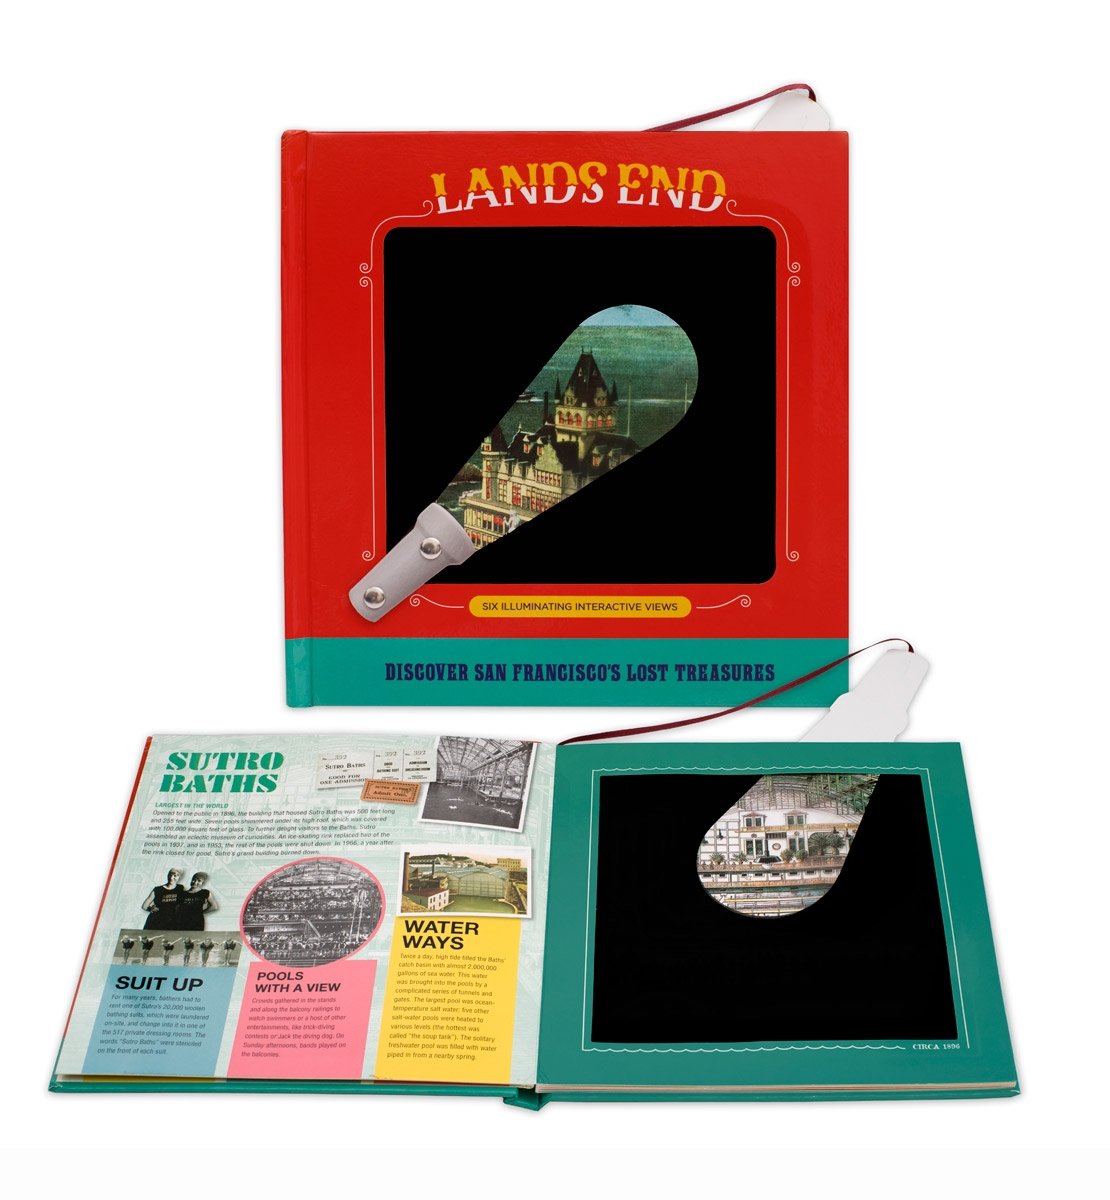 Colorful children's book, “Lands End: Discover San Francisco's Lost Treasures, Six Illuminating Interactive Views."